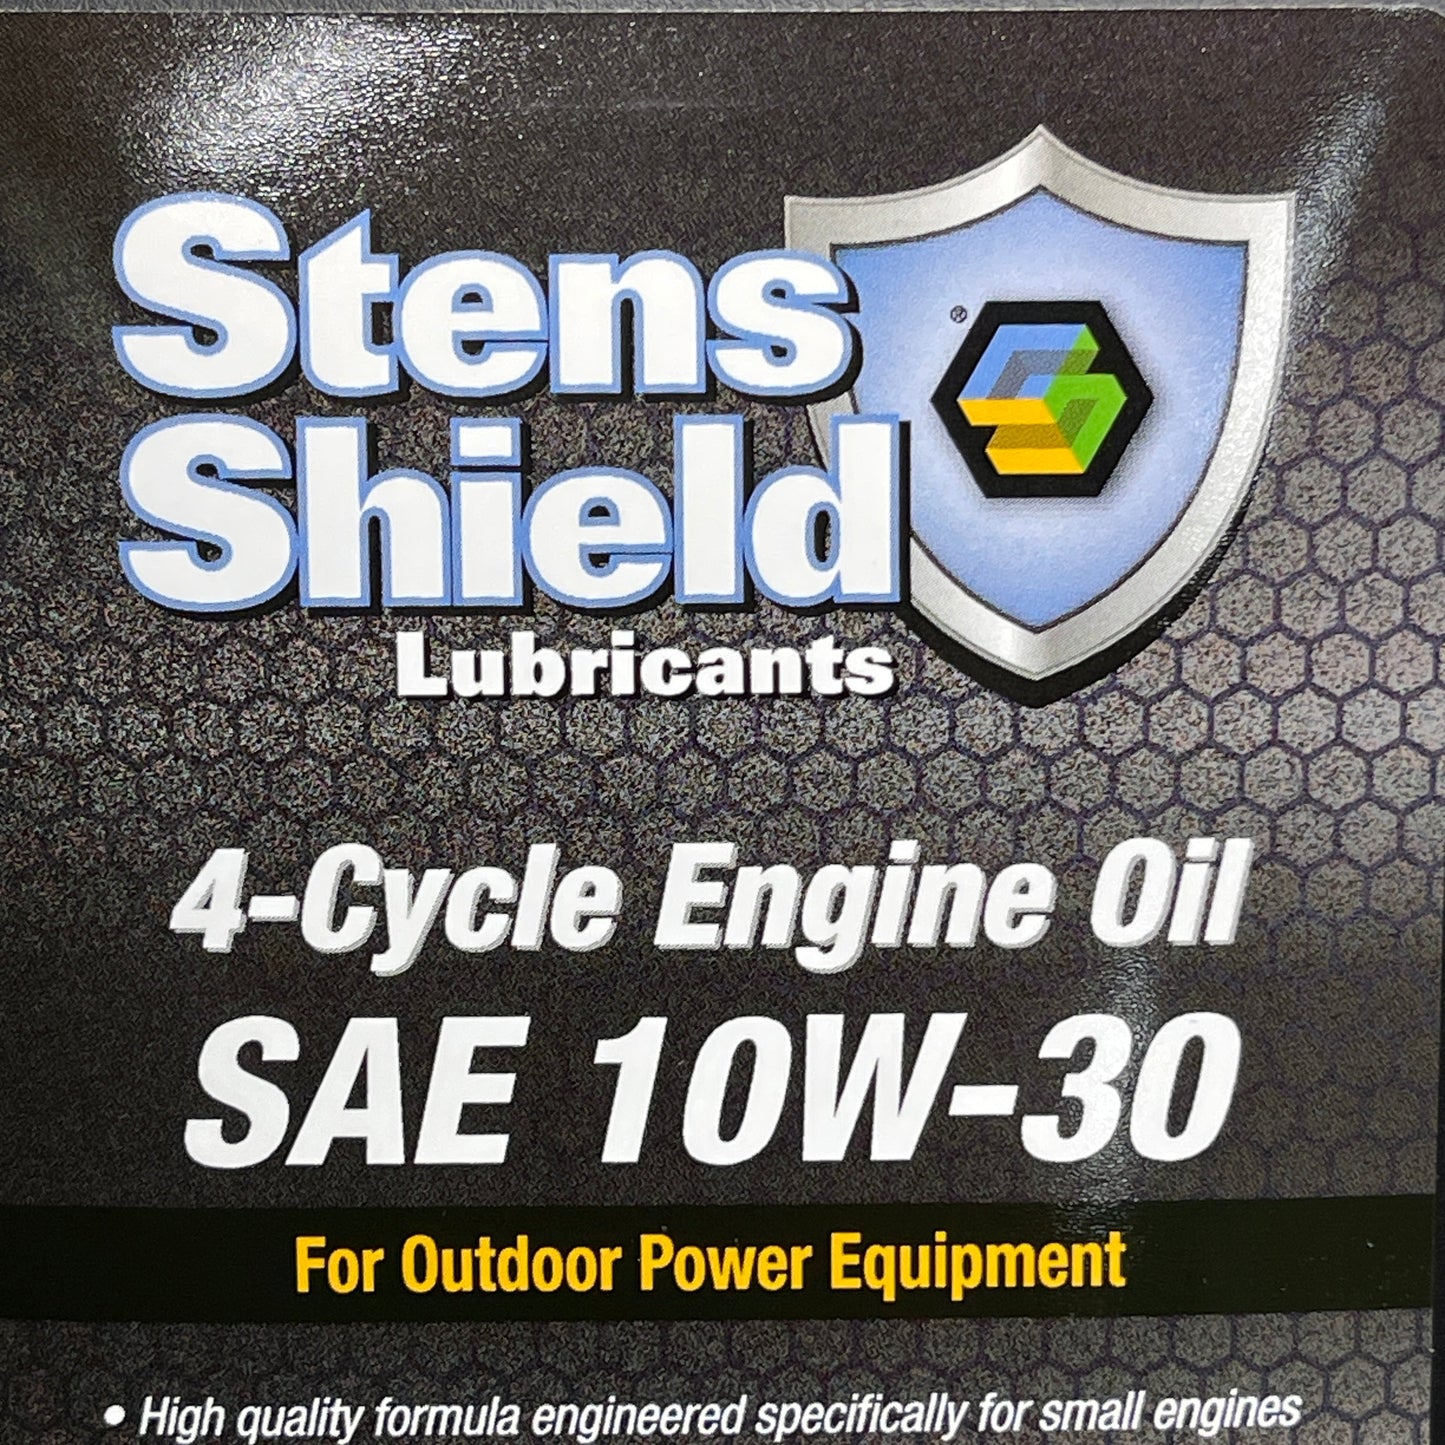 STENS SHIELD 12-PACK! 4-Cycle Engine Oil SAE 10W-30 1 Quart Bottles 770-132 (New)